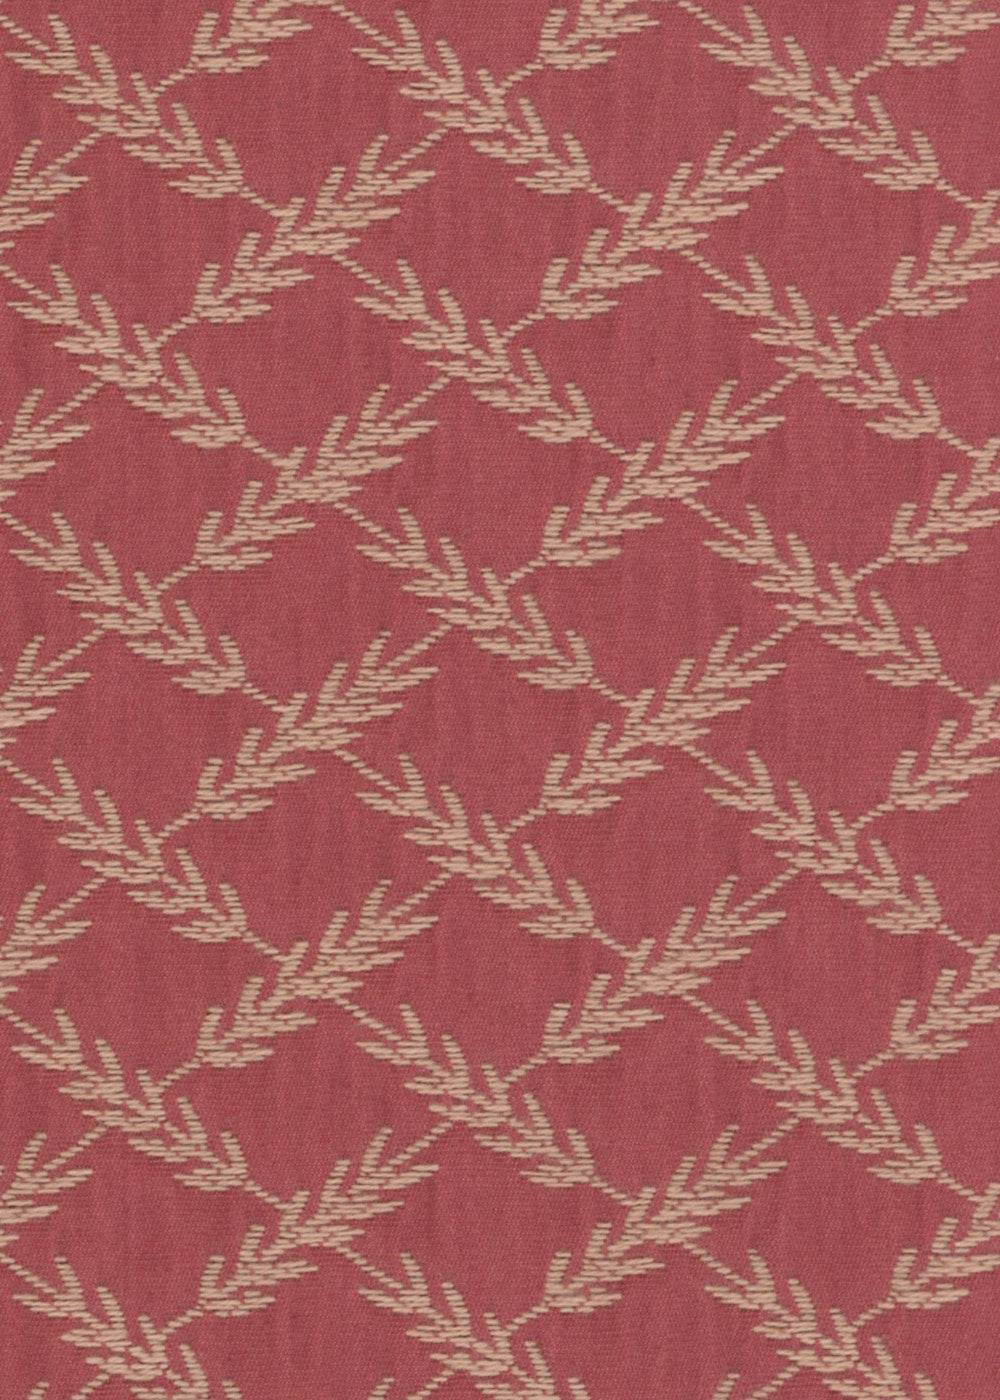 red upholstery fabric with a woven pattern that looks like ears of wheat